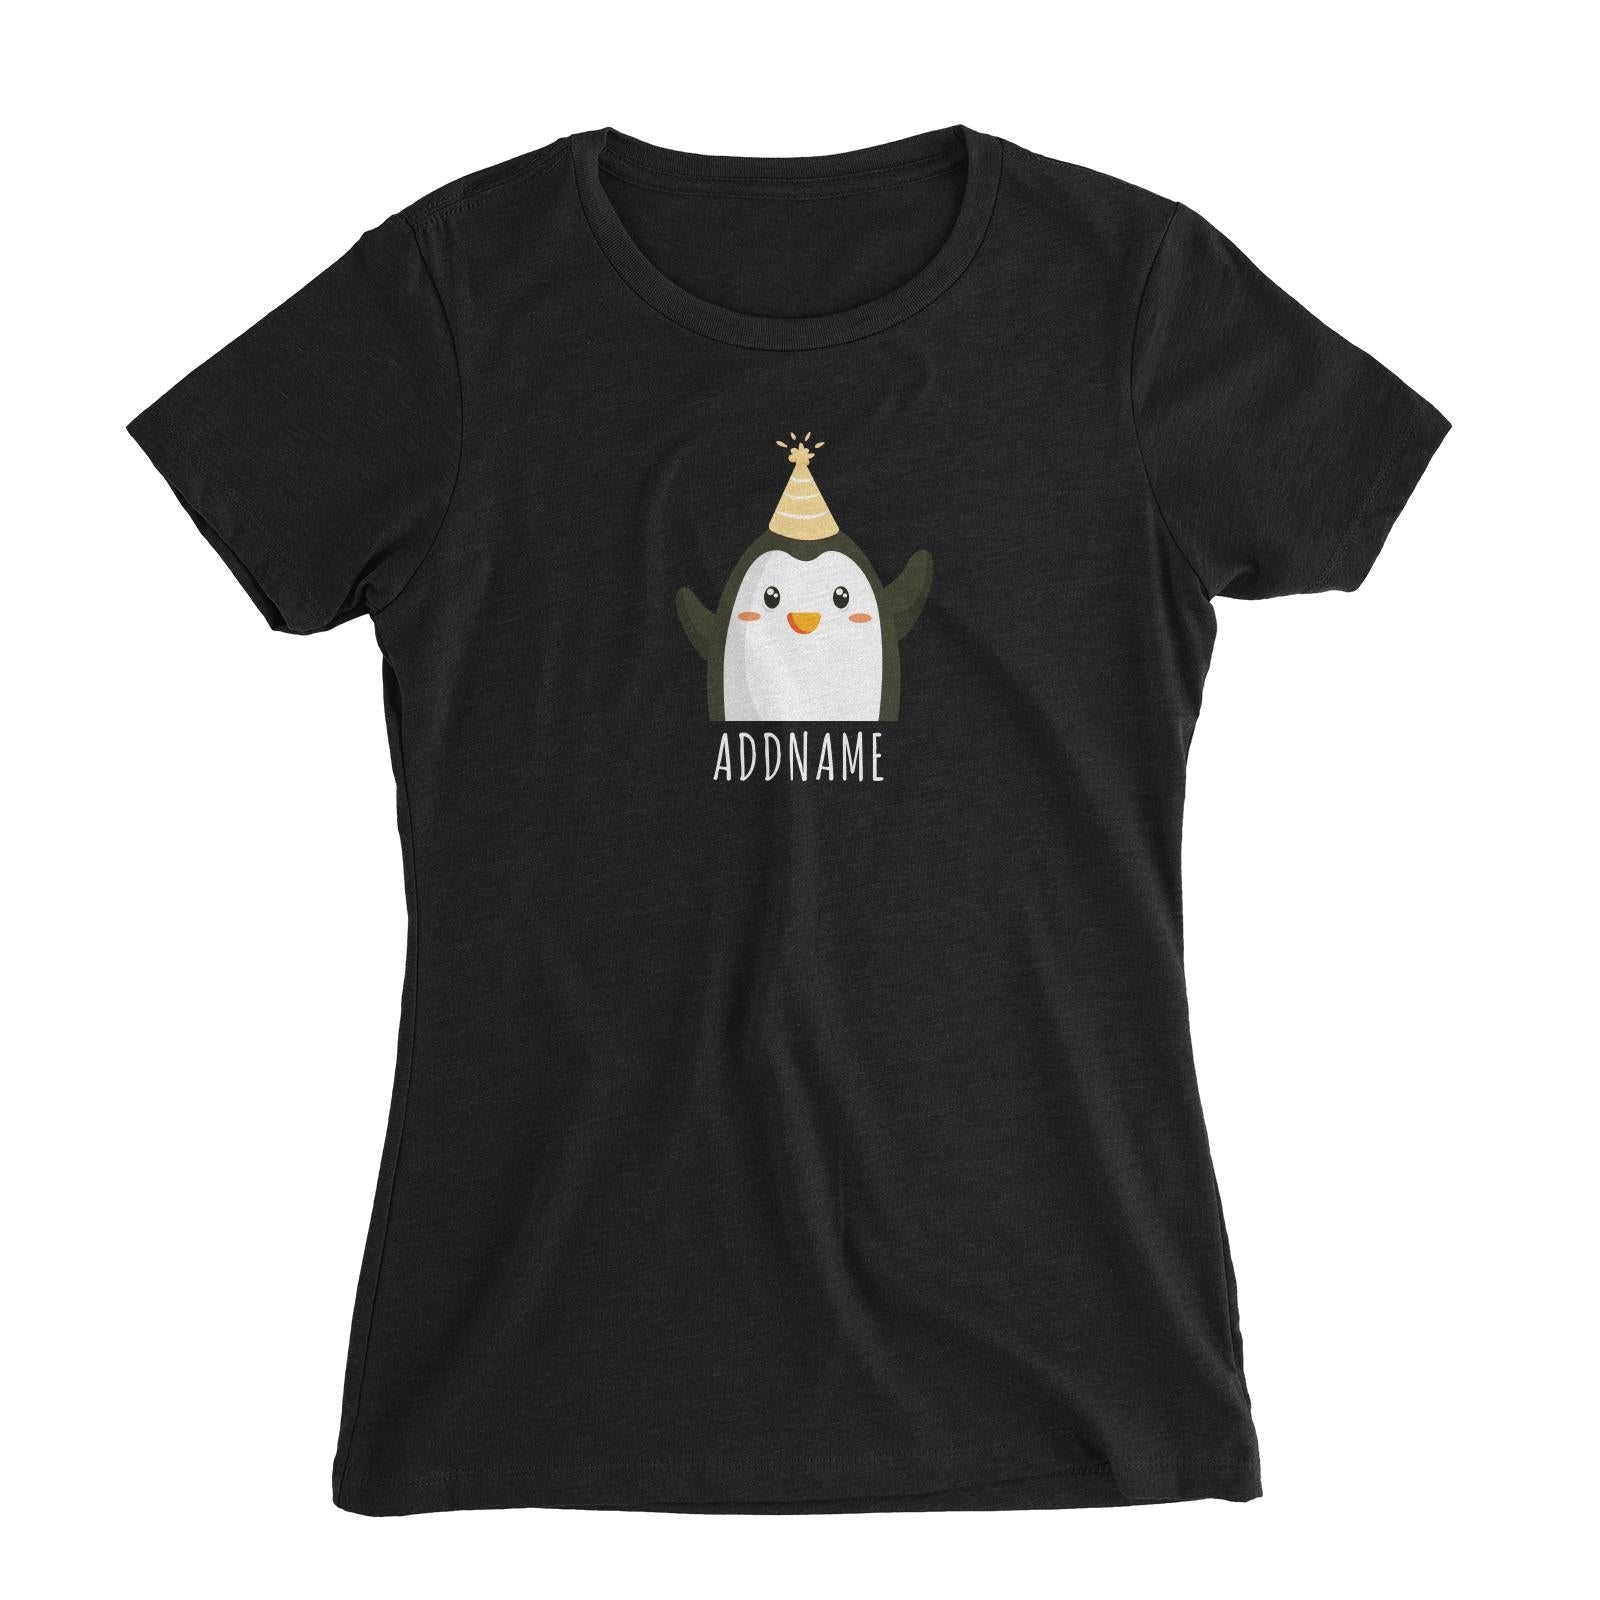 Birthday Cute Penguin Wearing Party Hat Addname Women's Slim Fit T-Shirt